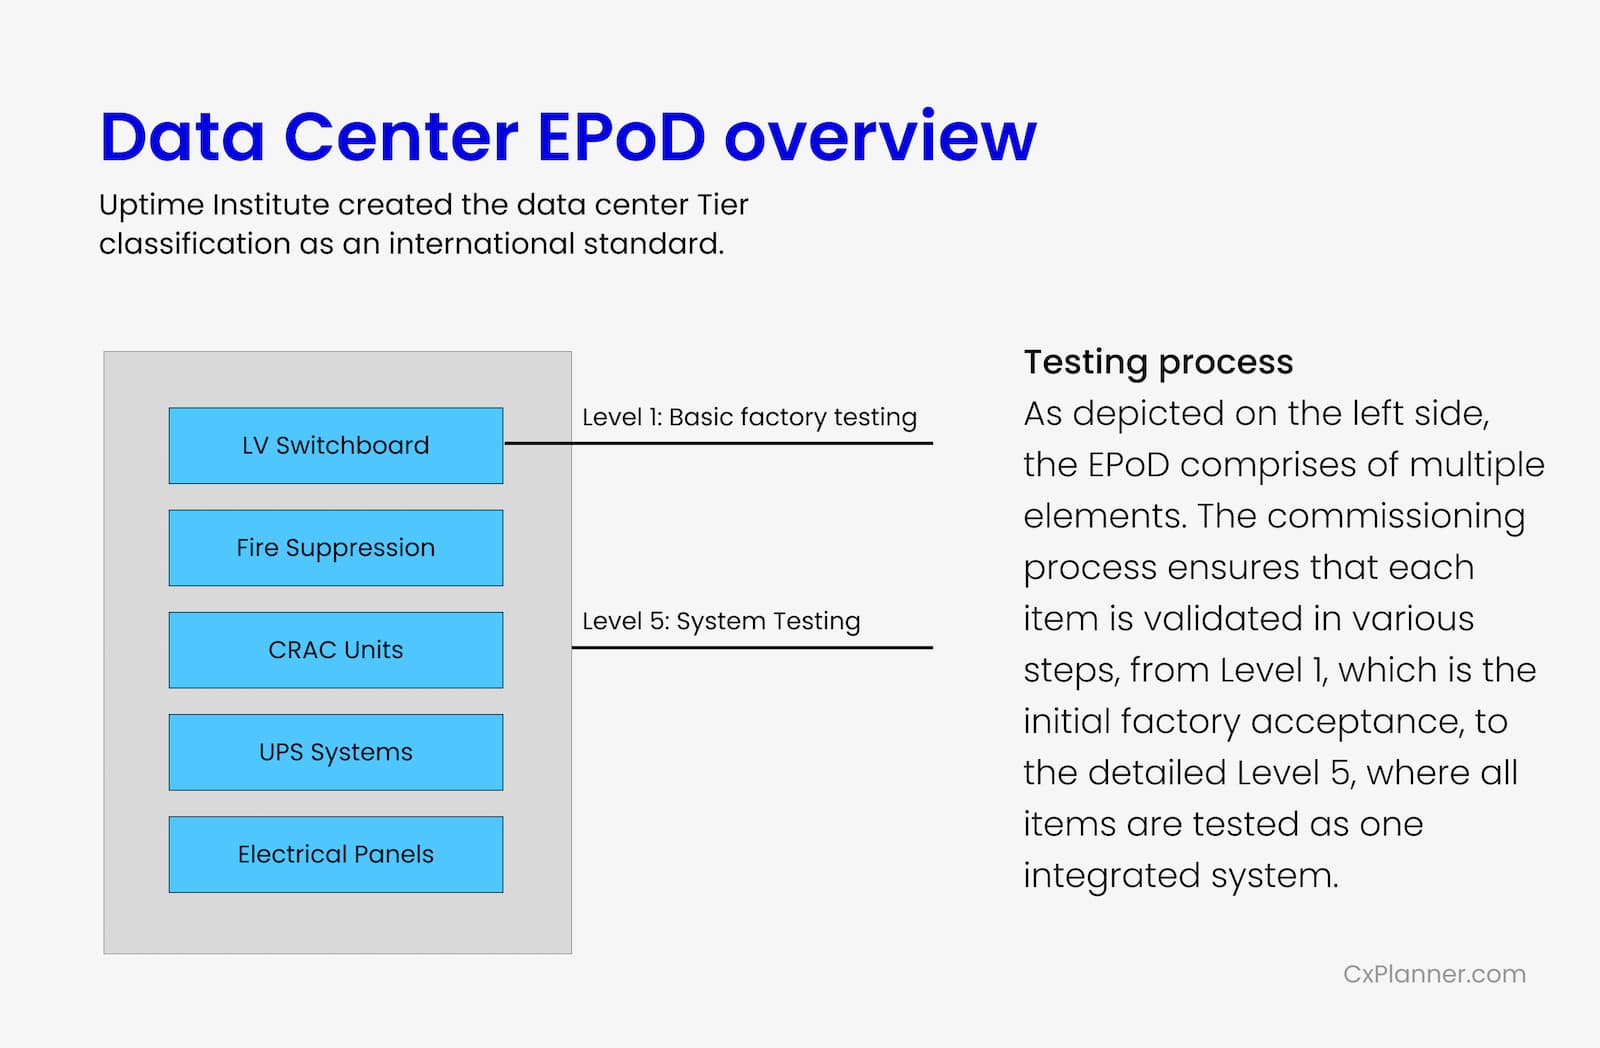 Commissioning overview of data center EPOD